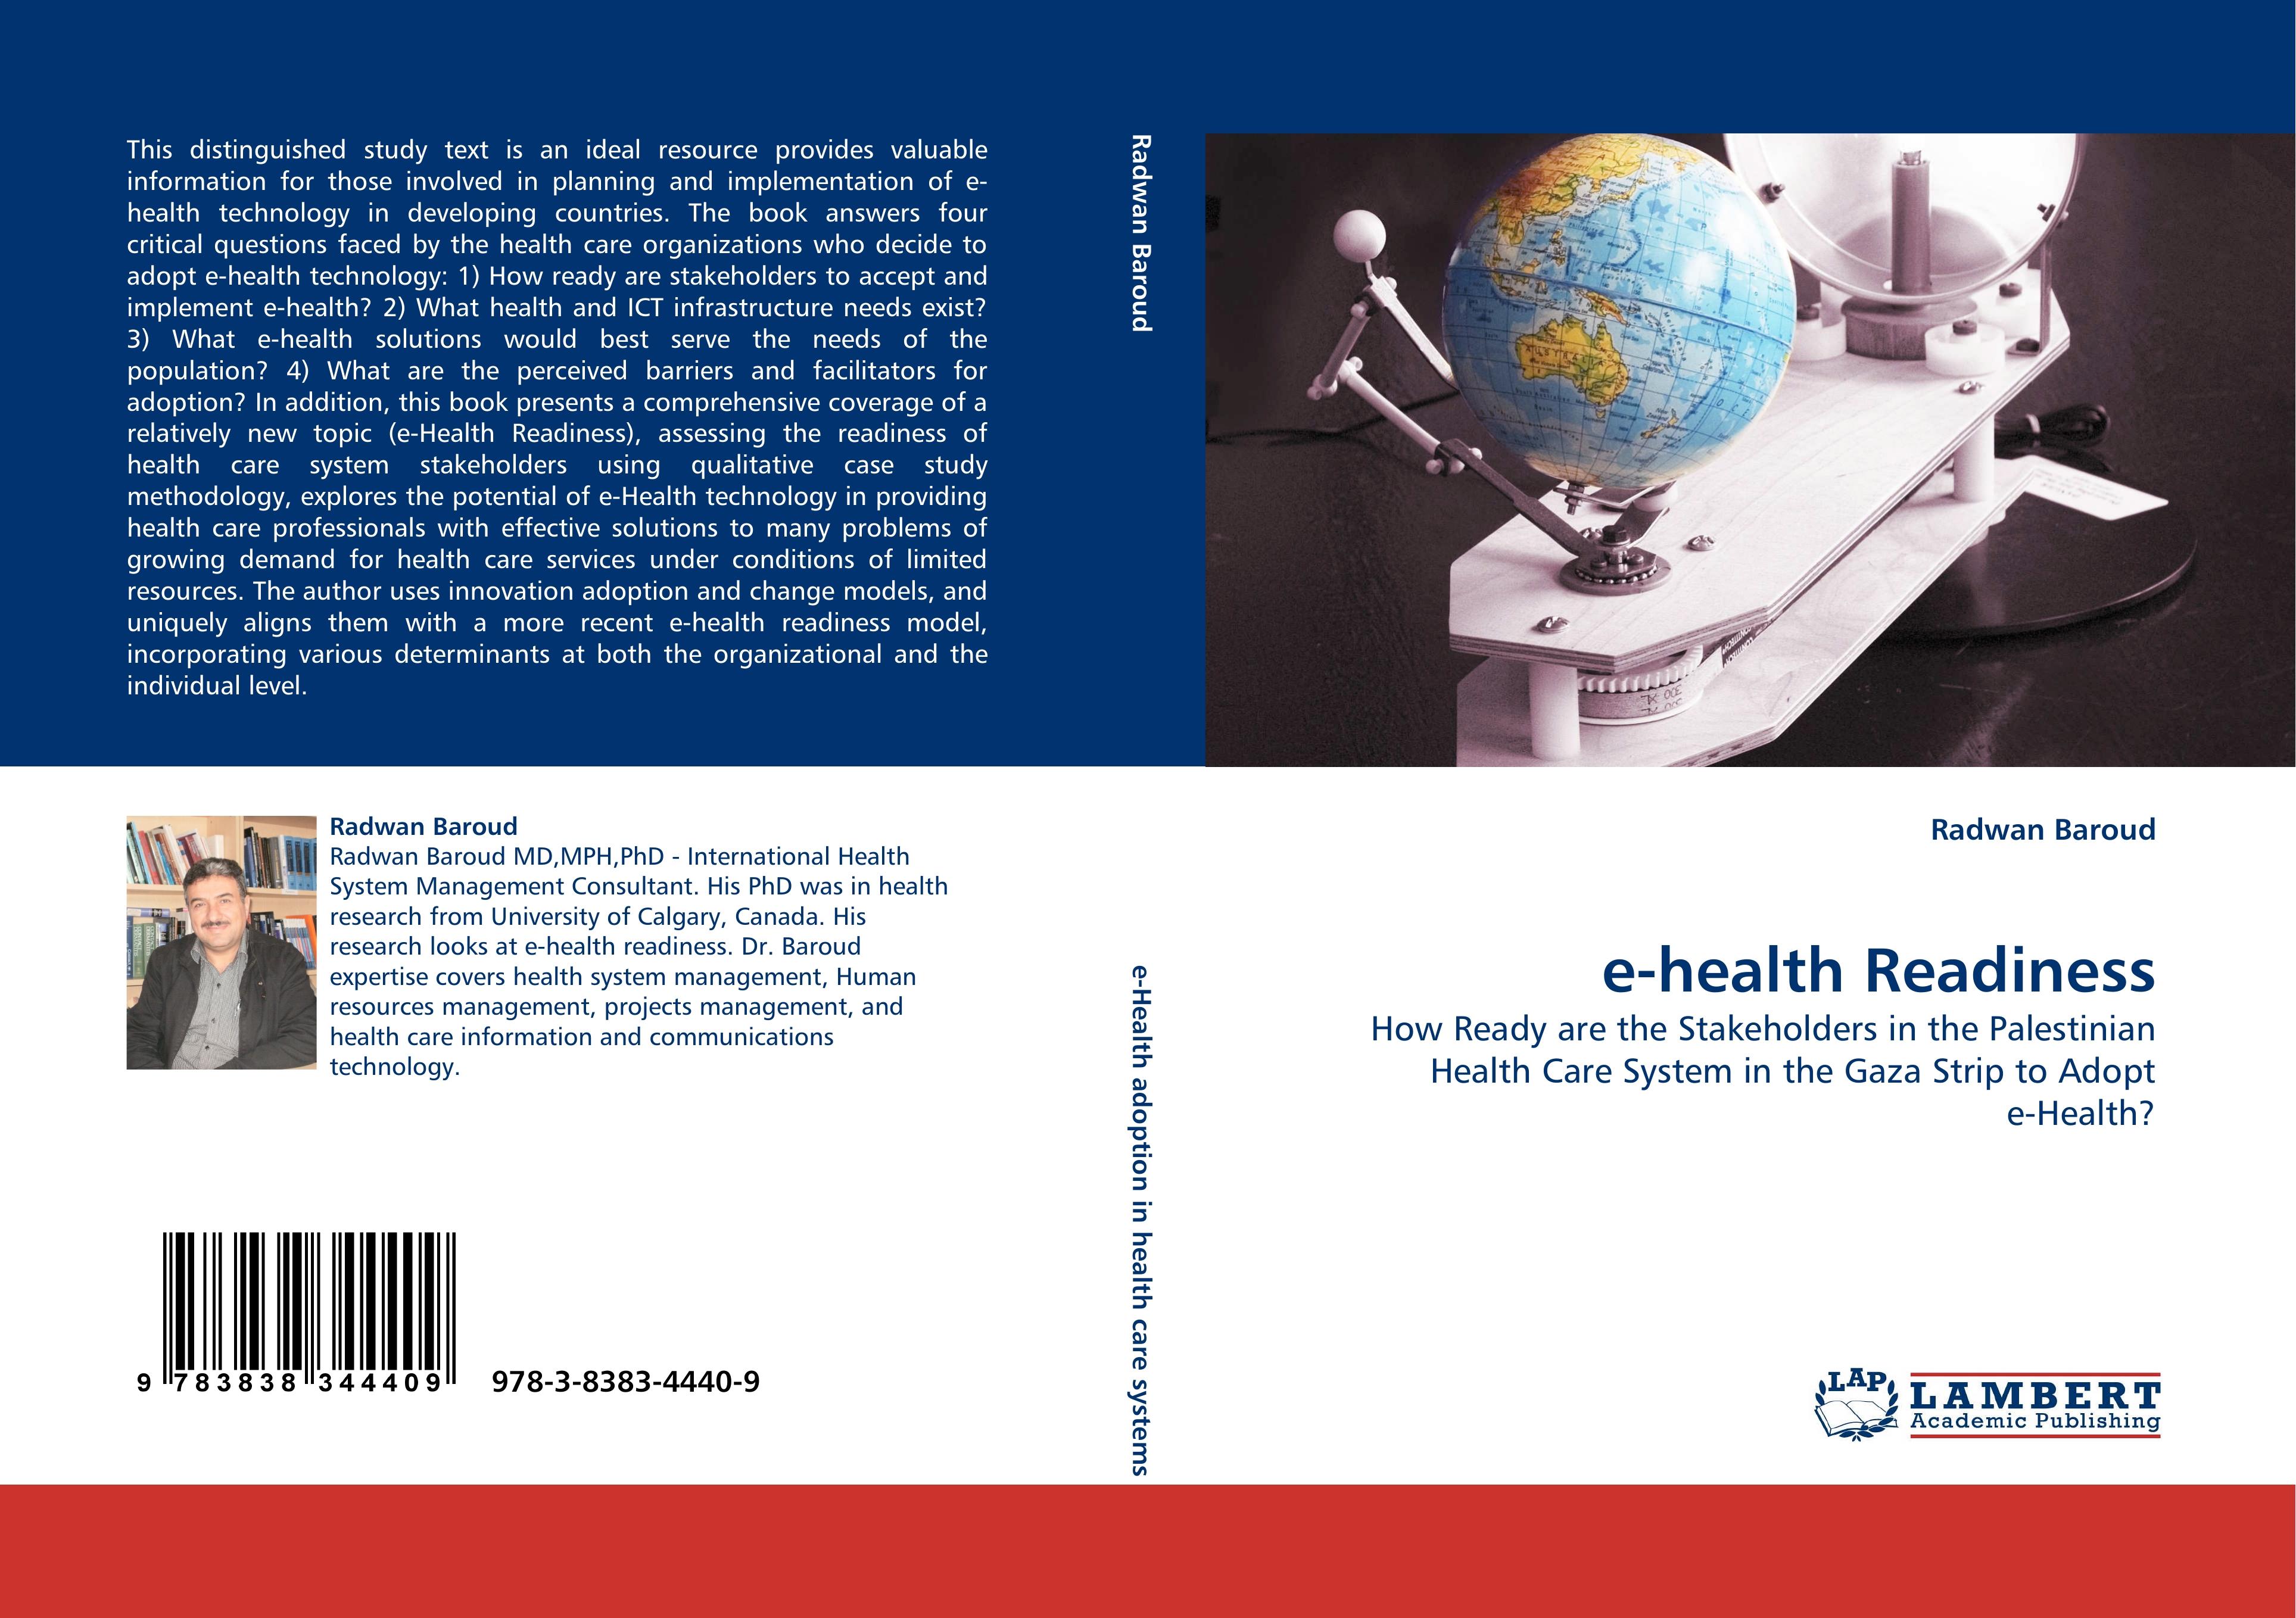 e-health Readiness / How Ready are the Stakeholders in the Palestinian Health Care System in the Gaza Strip to Adopt e-Health? / Radwan Baroud / Taschenbuch / Paperback / 272 S. / Englisch / 2010 - Baroud, Radwan